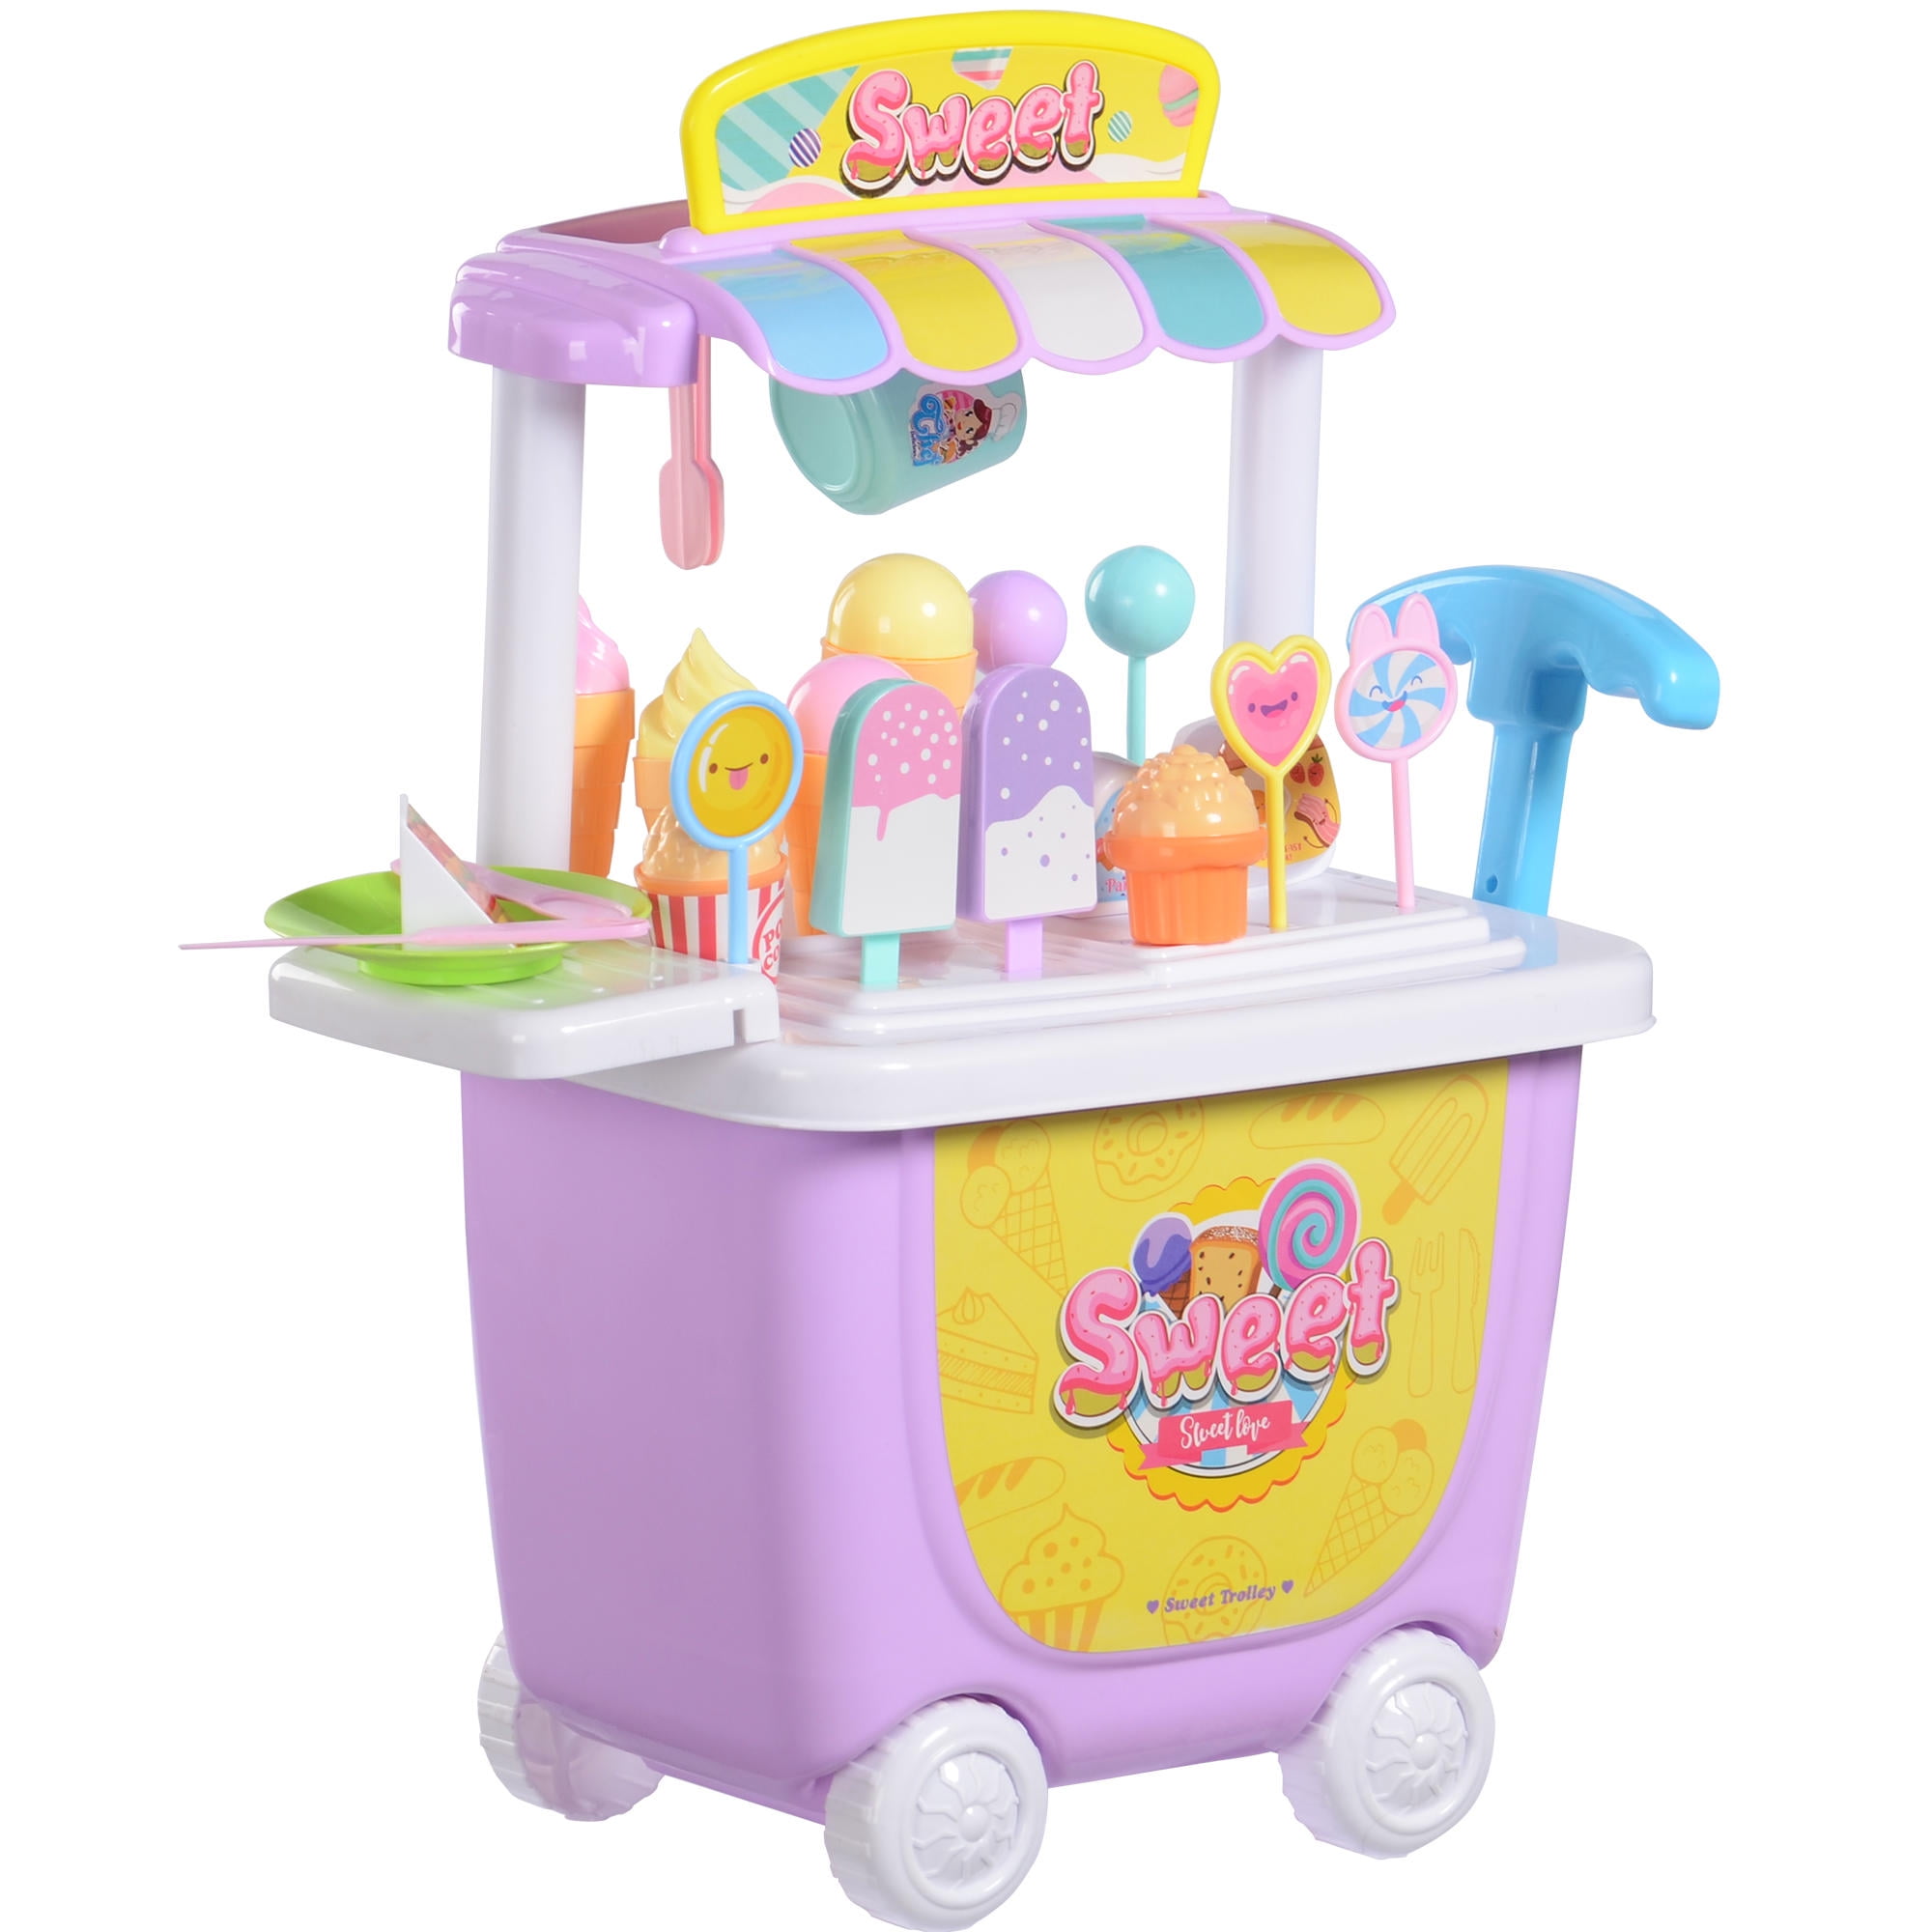 Toy Gifts for Boys & Girls Aged 2-7 Wotryit Shopping Grocery Toy with Shopping Cart and Scanner /Food & Accessories 